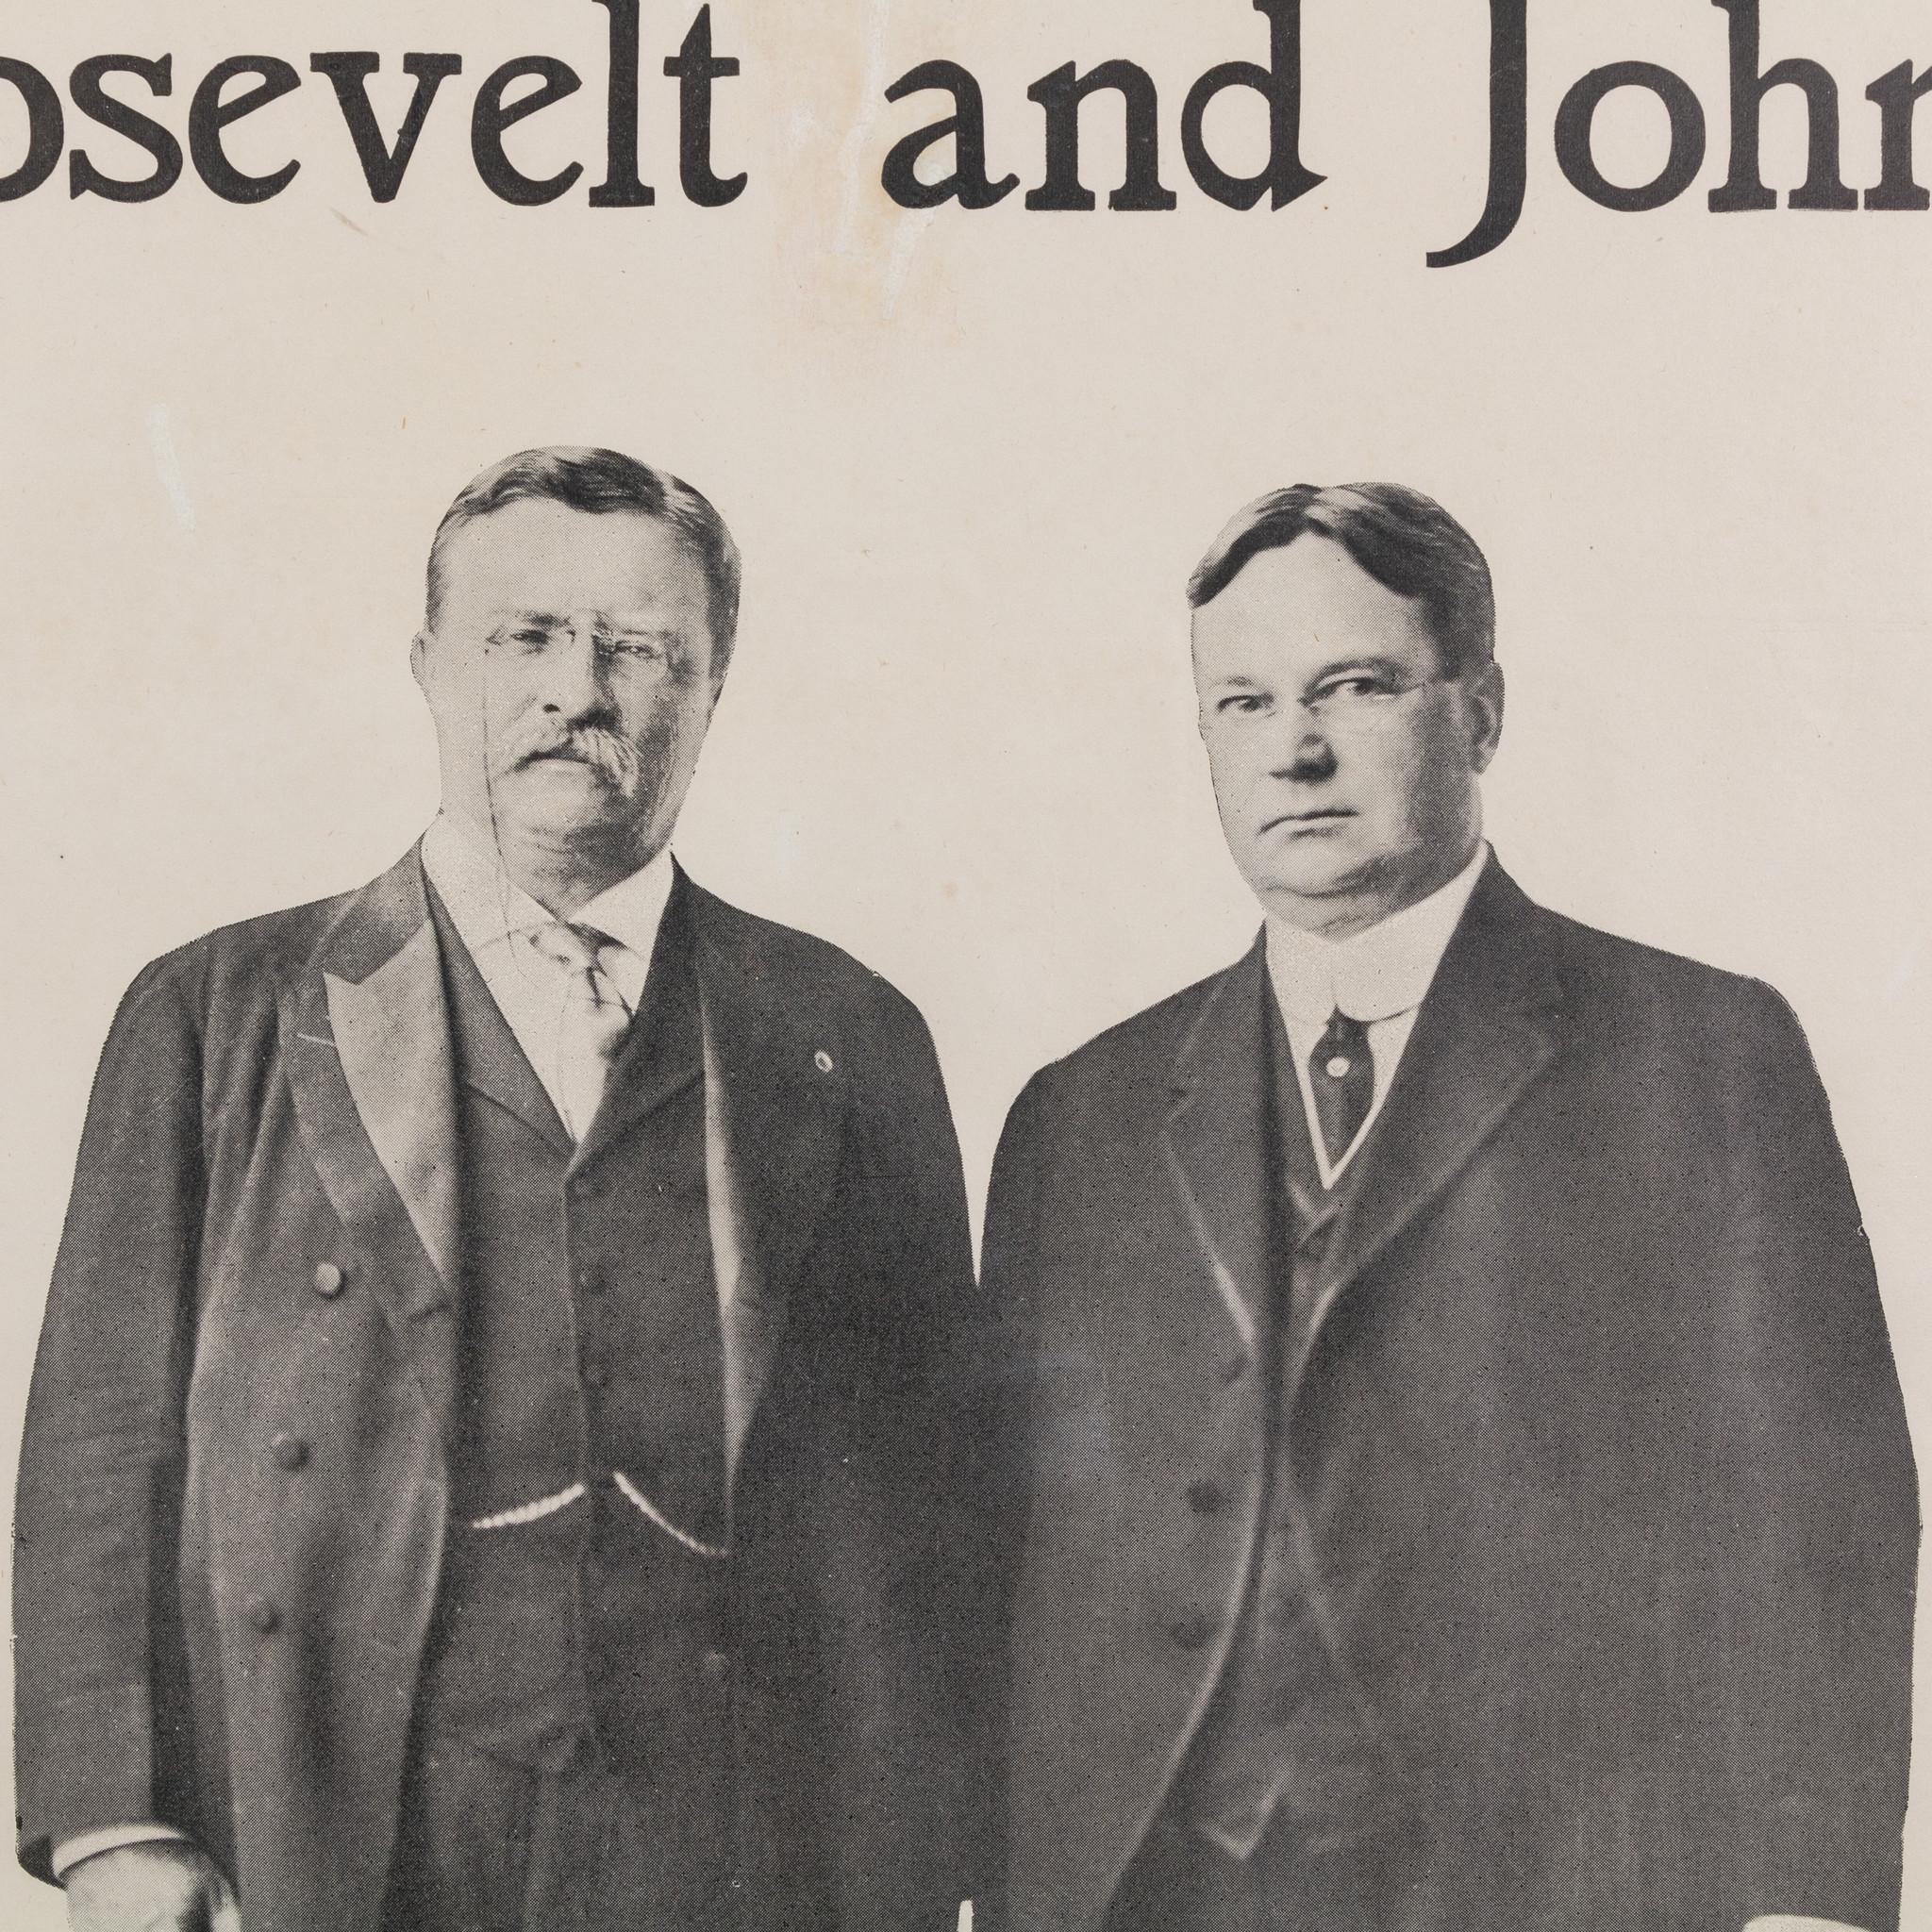 teddy roosevelt campaign poster